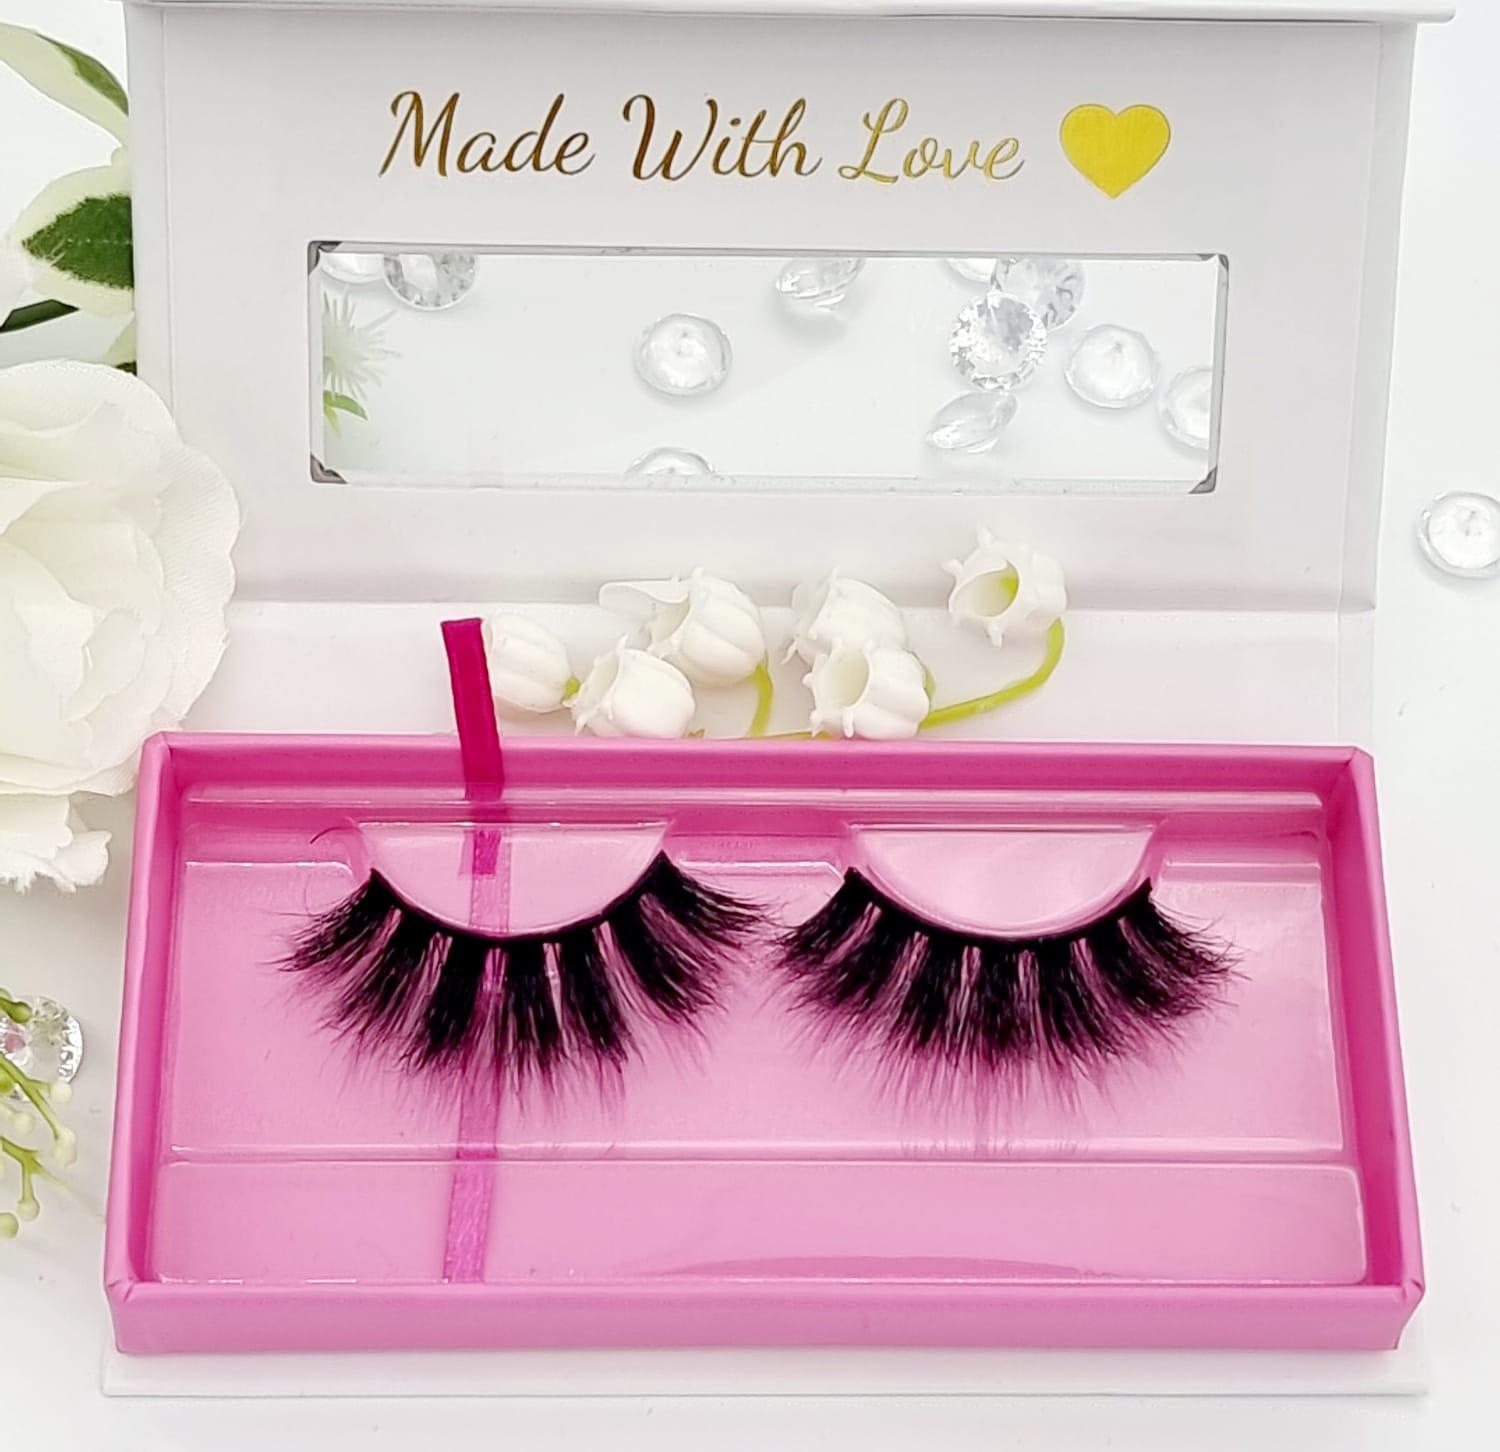 Lily-Rose lashes Premier Strip lashes by Lily-Rose with the party girl in mind  Lilly-Rose  Lashes are Glamorous 3D Lashes, . Mink Lashes and Faux Mink Lashes - Dramatic Lashes and Natural Lashes - Strip Lashes